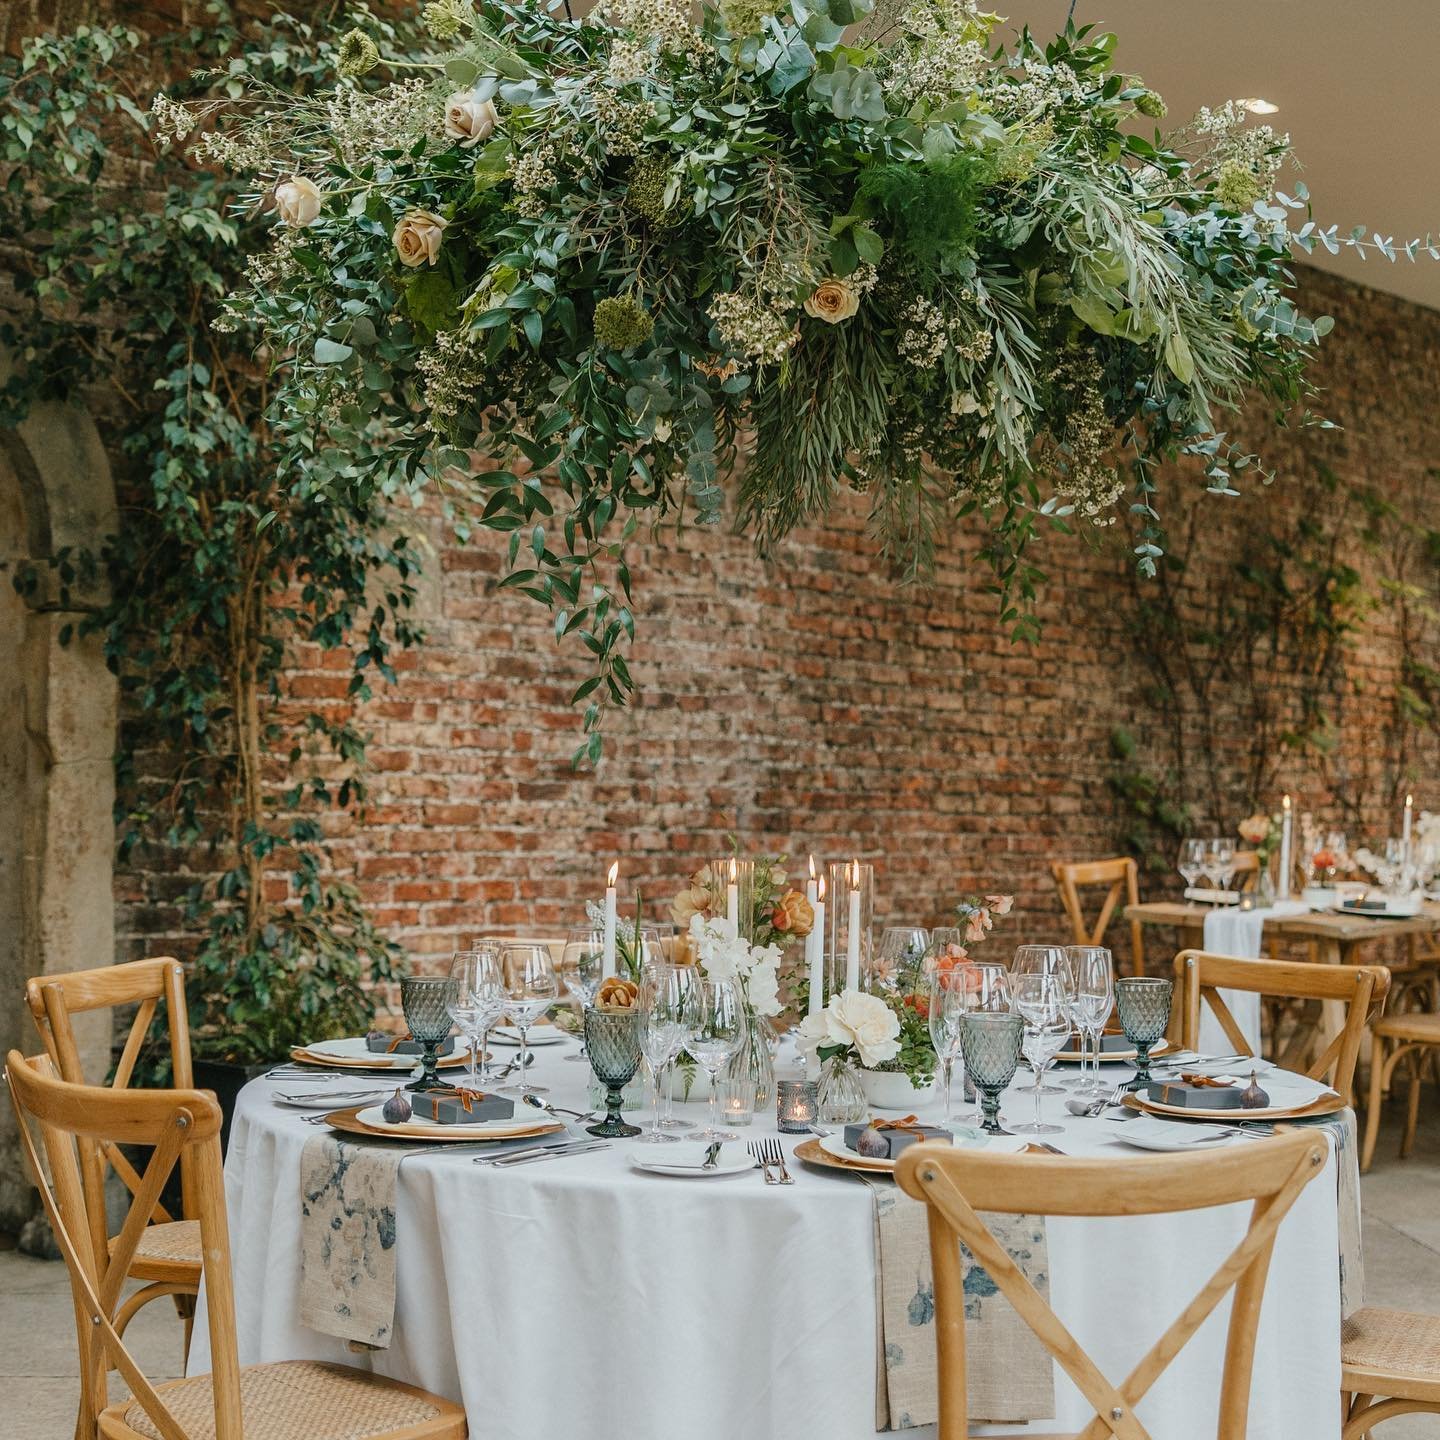 If you&rsquo;re wondering how to make a stunning visual statement, you can with a fabulous hanging installation.

We created this lush overhead canopy for a wedding breakfast using seven varieties of foliage, Ammi, Golden Mustard roses, white spray r